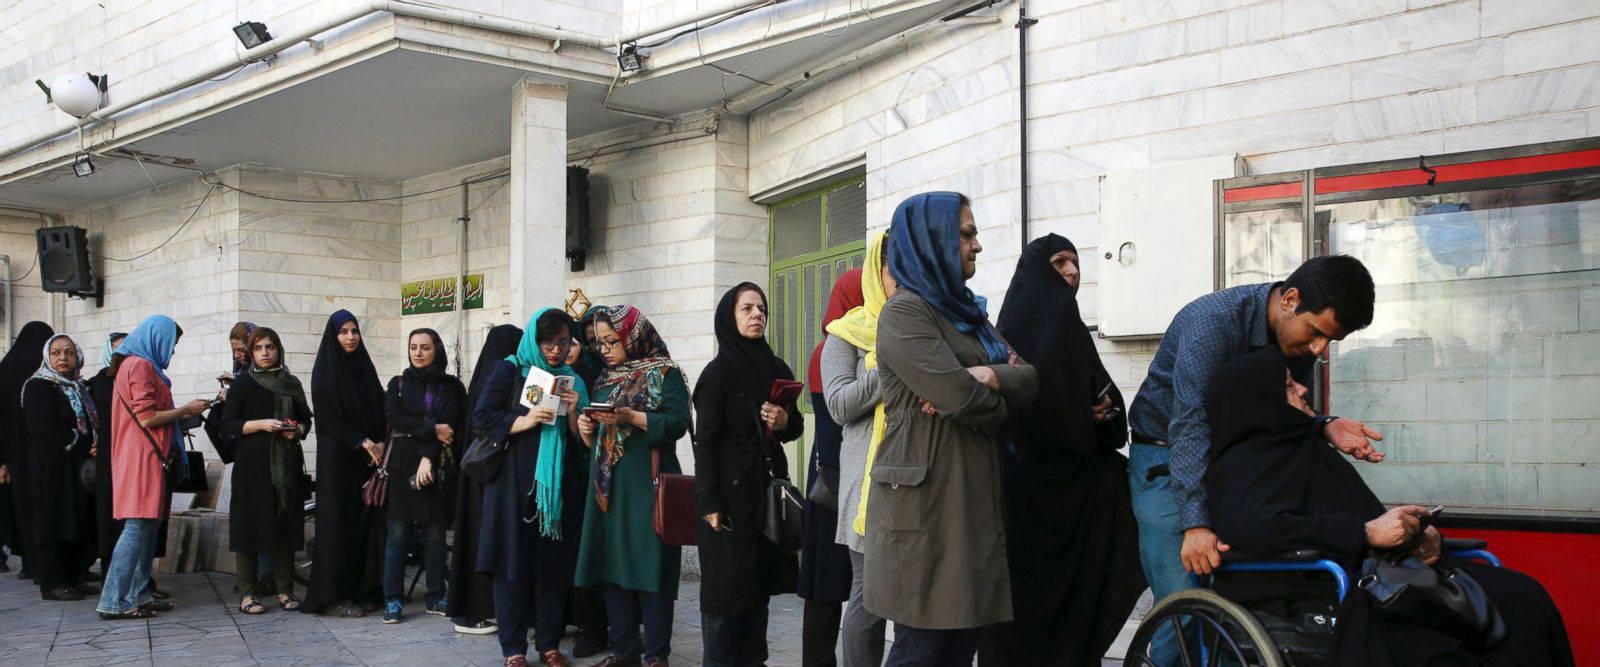 ifmat - Iran votes in first presidential election since nuclear deal